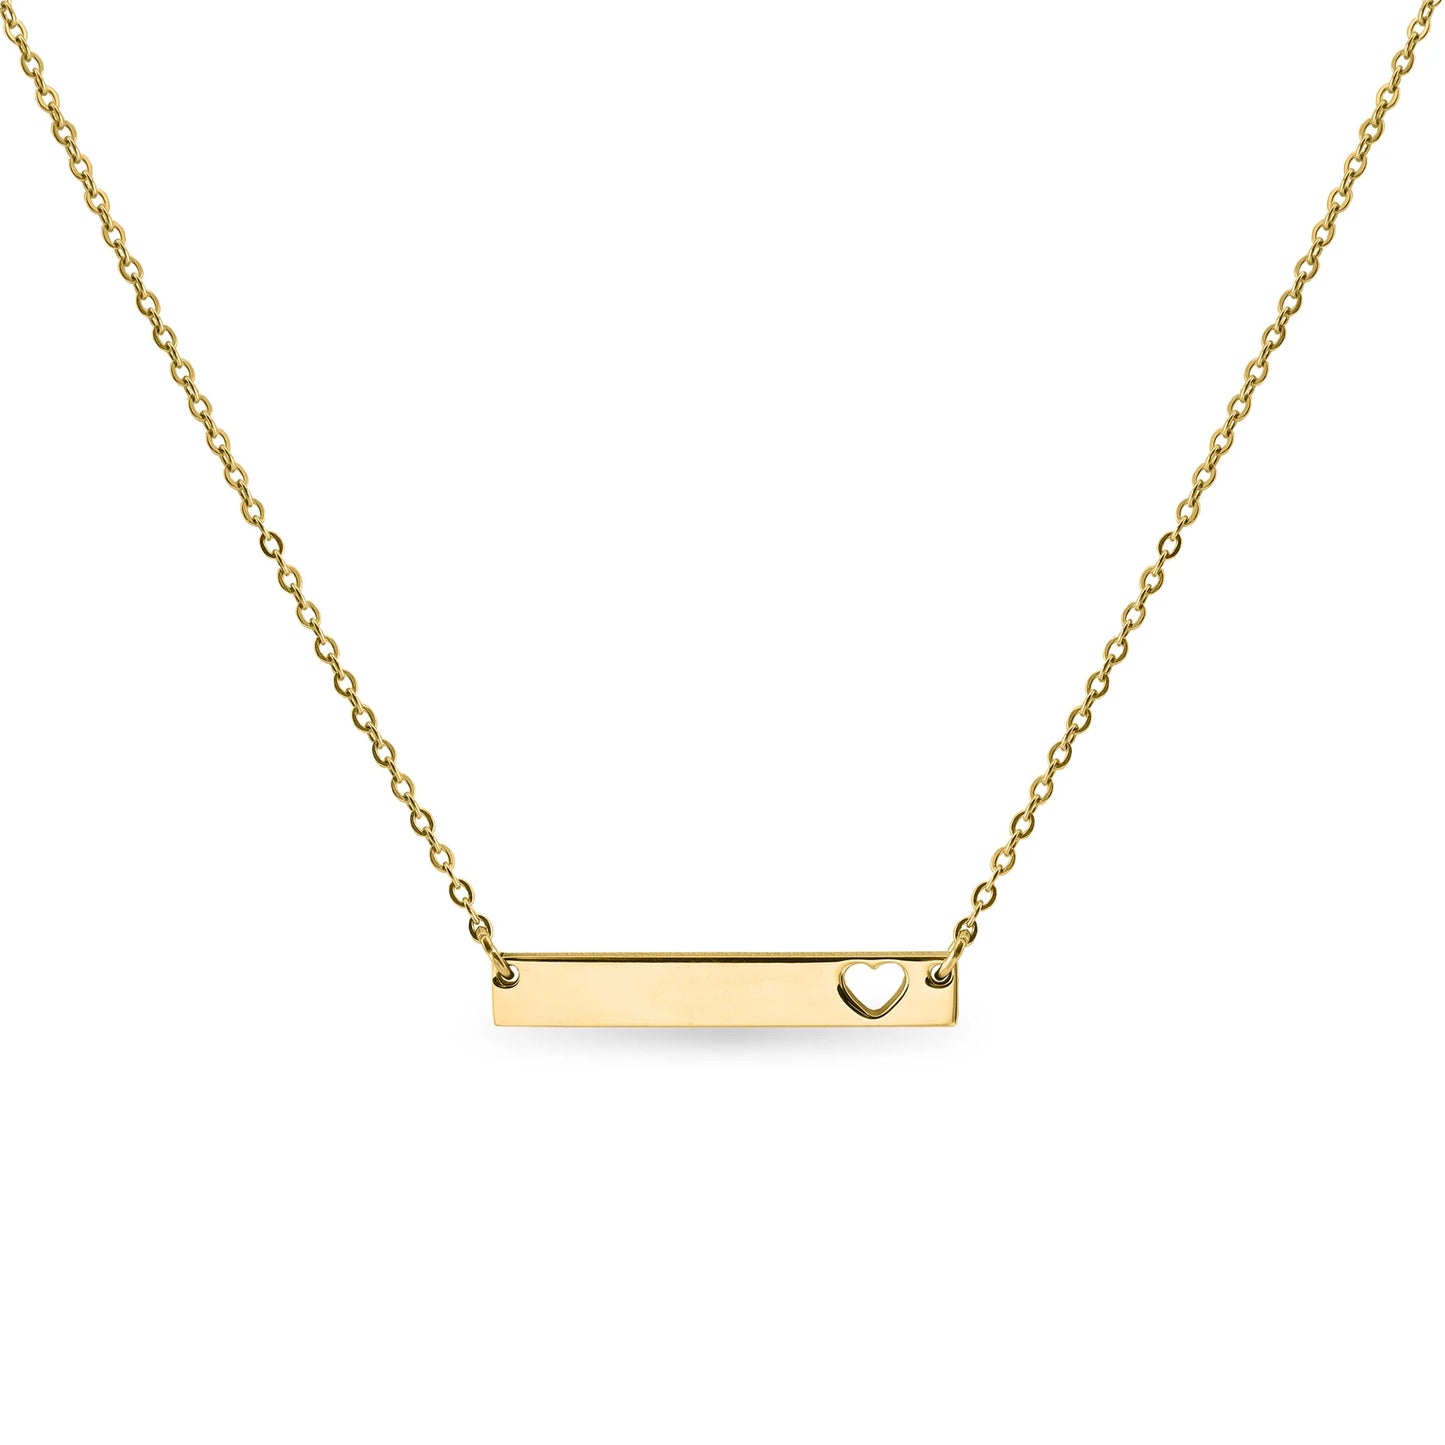 Cutout Heart Bar Stainless Steel Necklace